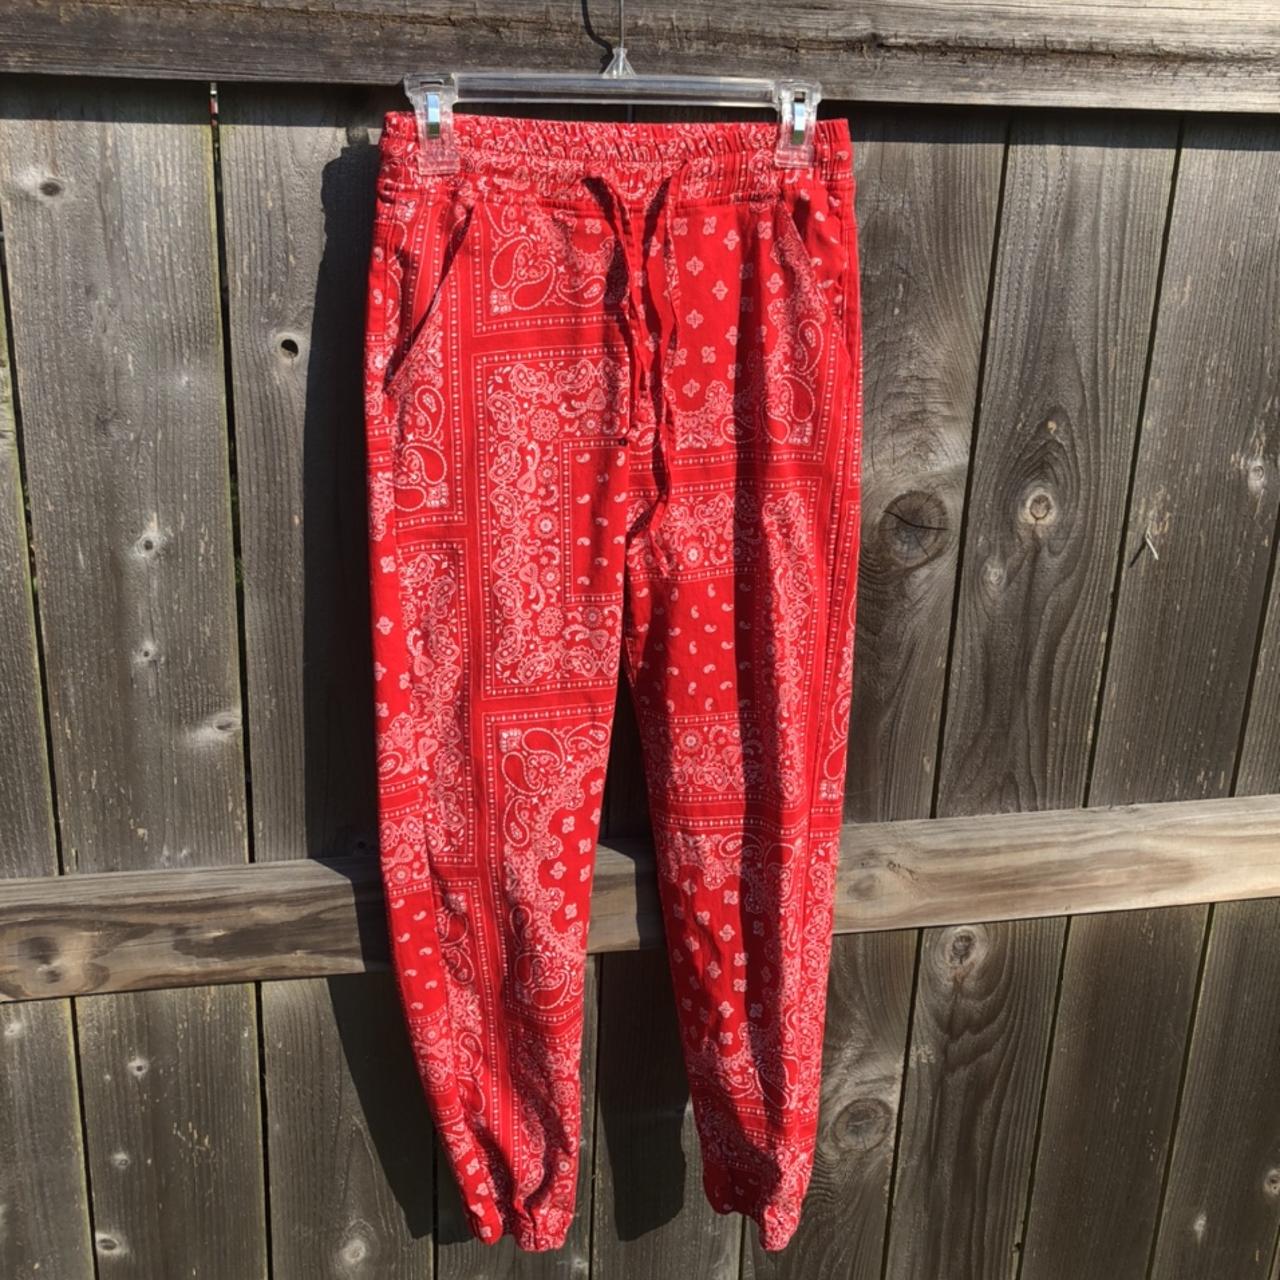 New Arrival Women's Bandana Jogger Pants Candy Pants for women Cotton  spandex free size | Shopee Philippines